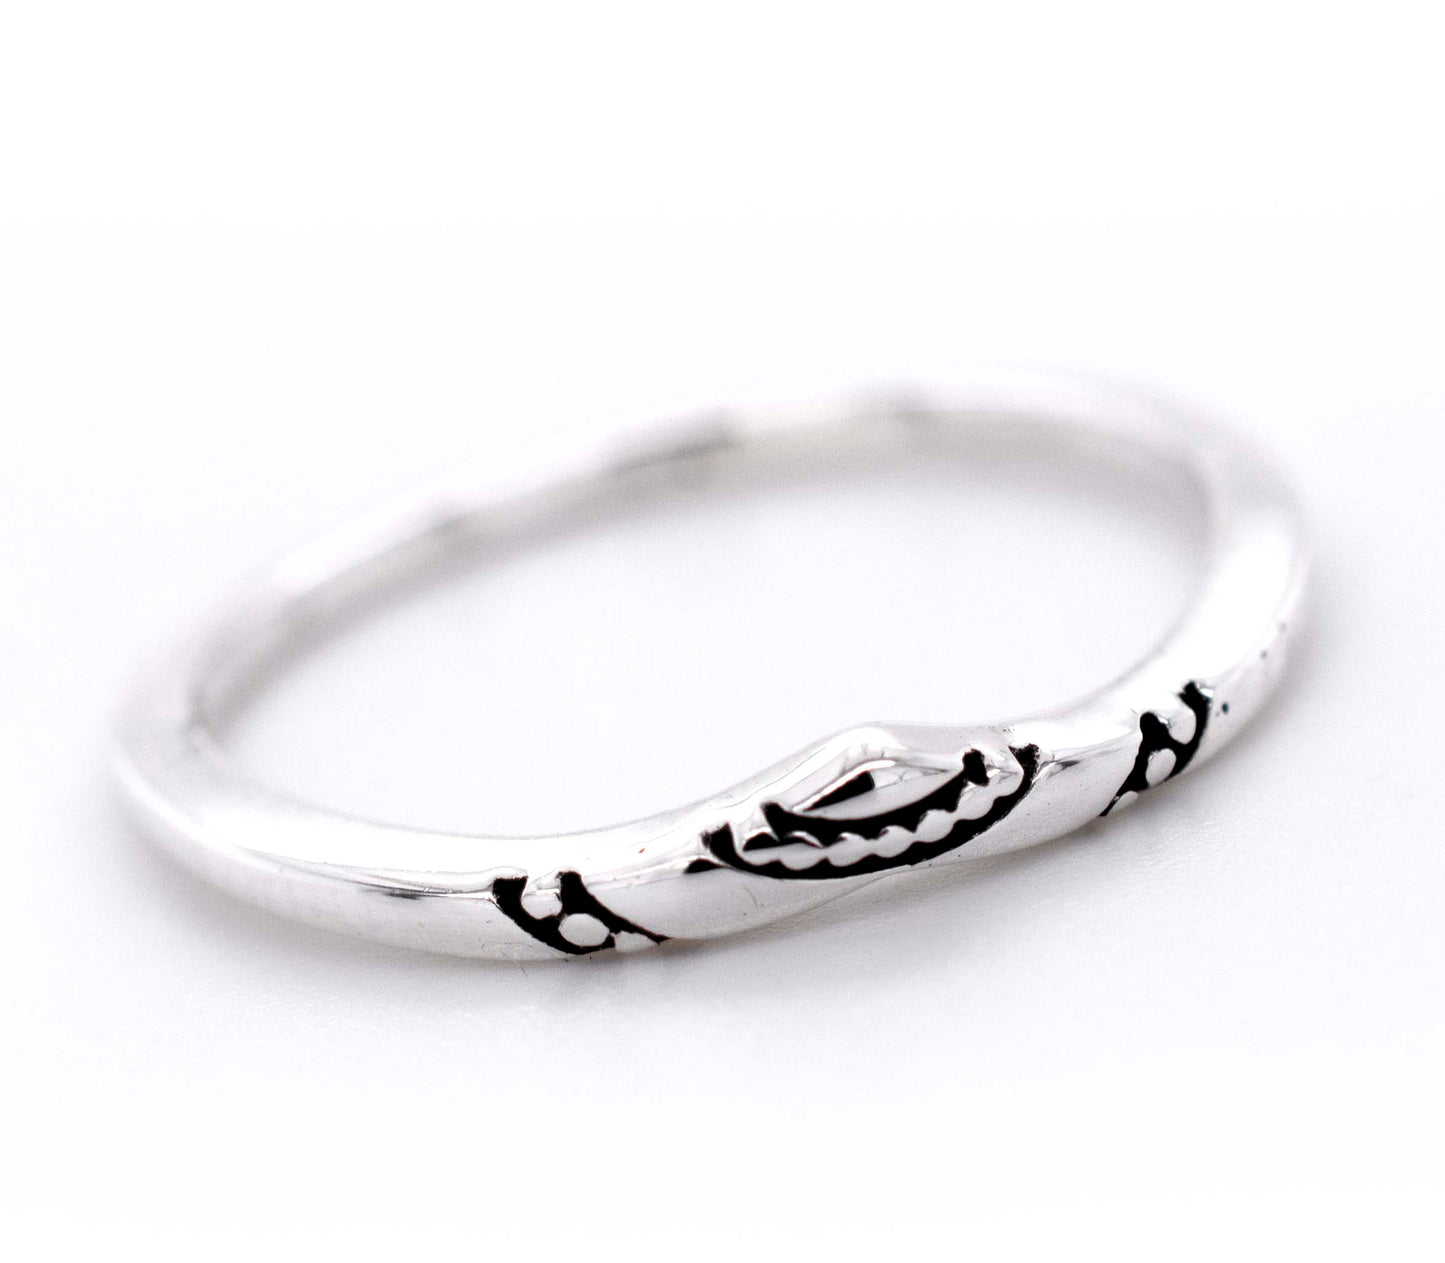 A minimalist silver Dainty Chevron Band With Etched Design, perfect for stacking.